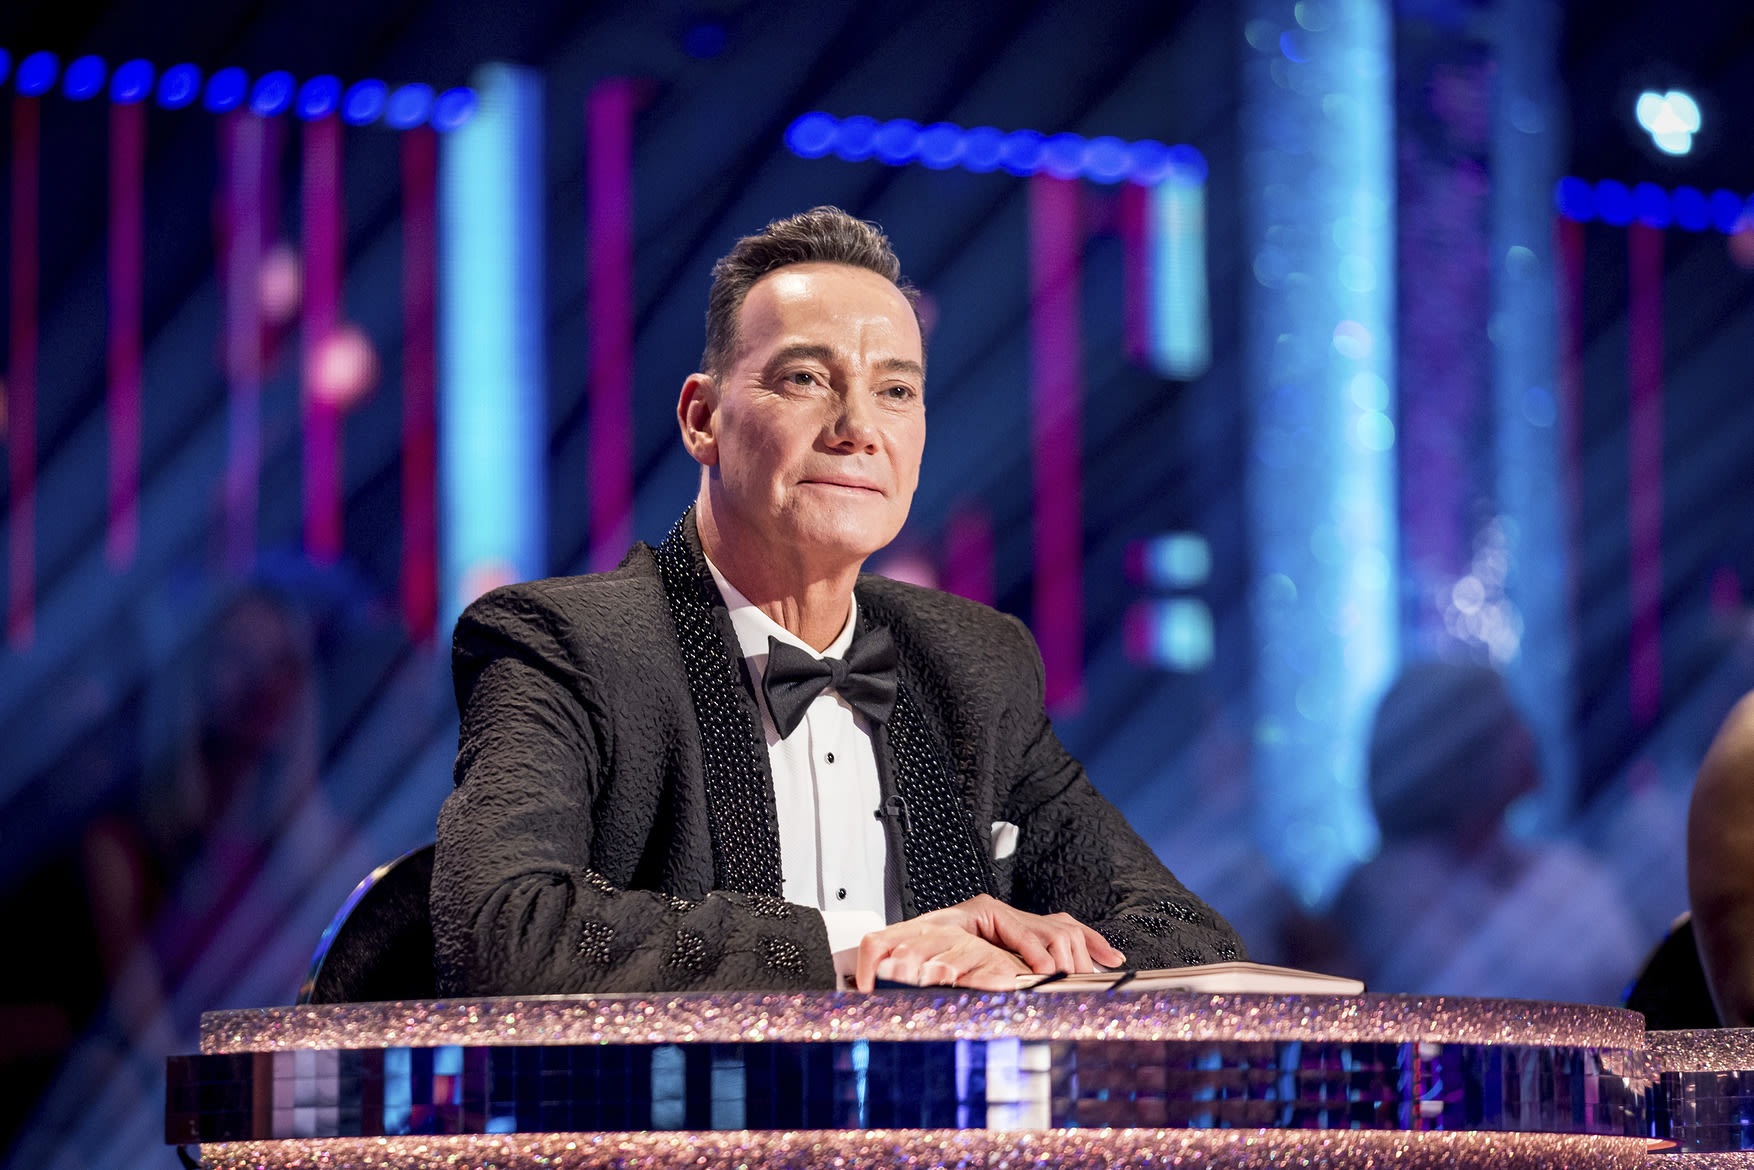 Craig Revel Horwood admits Strictly's future at stake in investigation